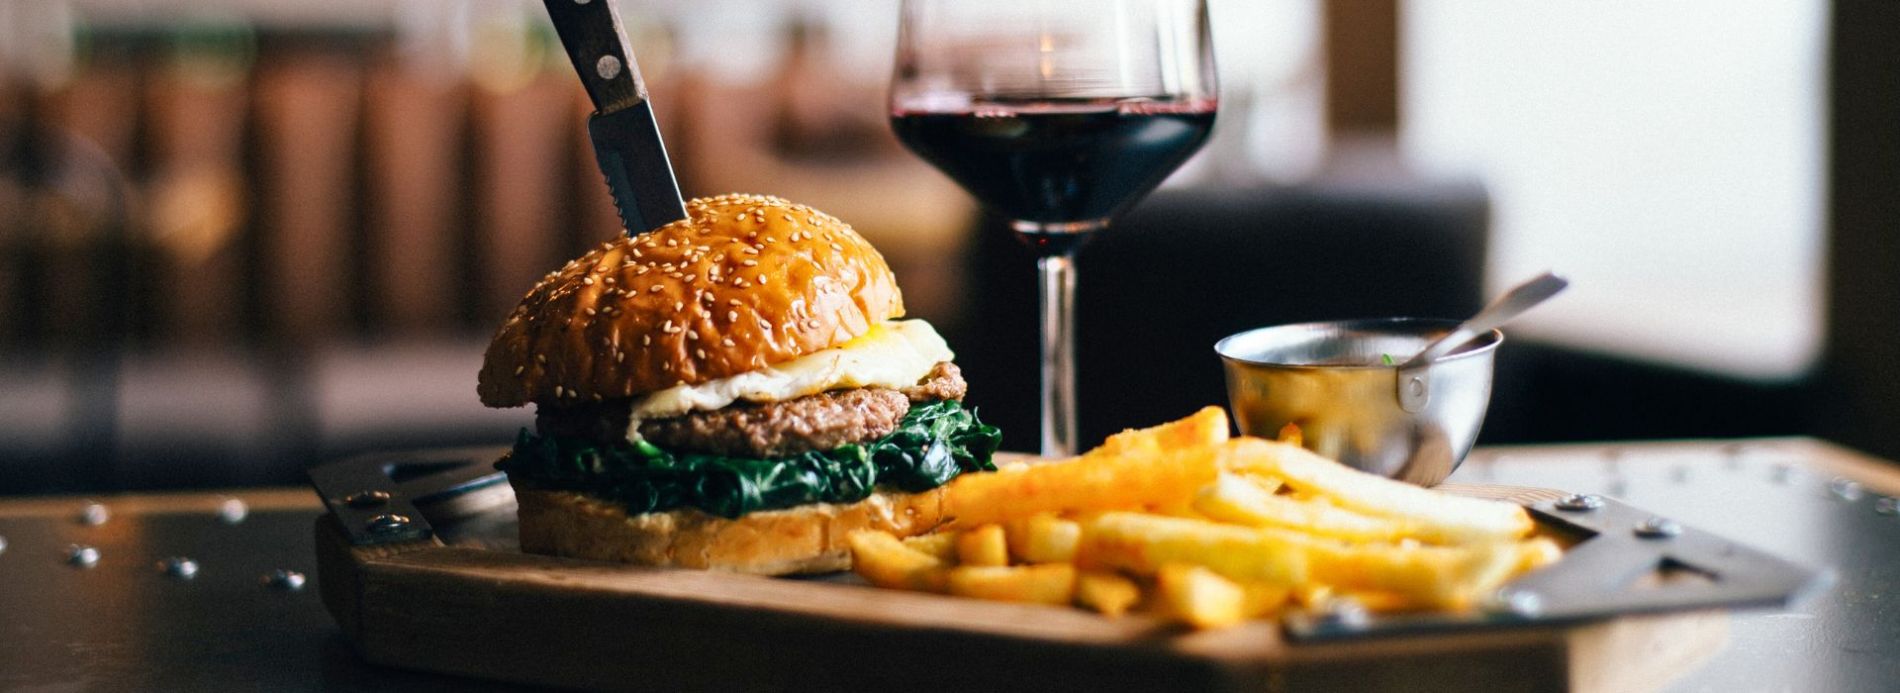 burger with fries and red wine